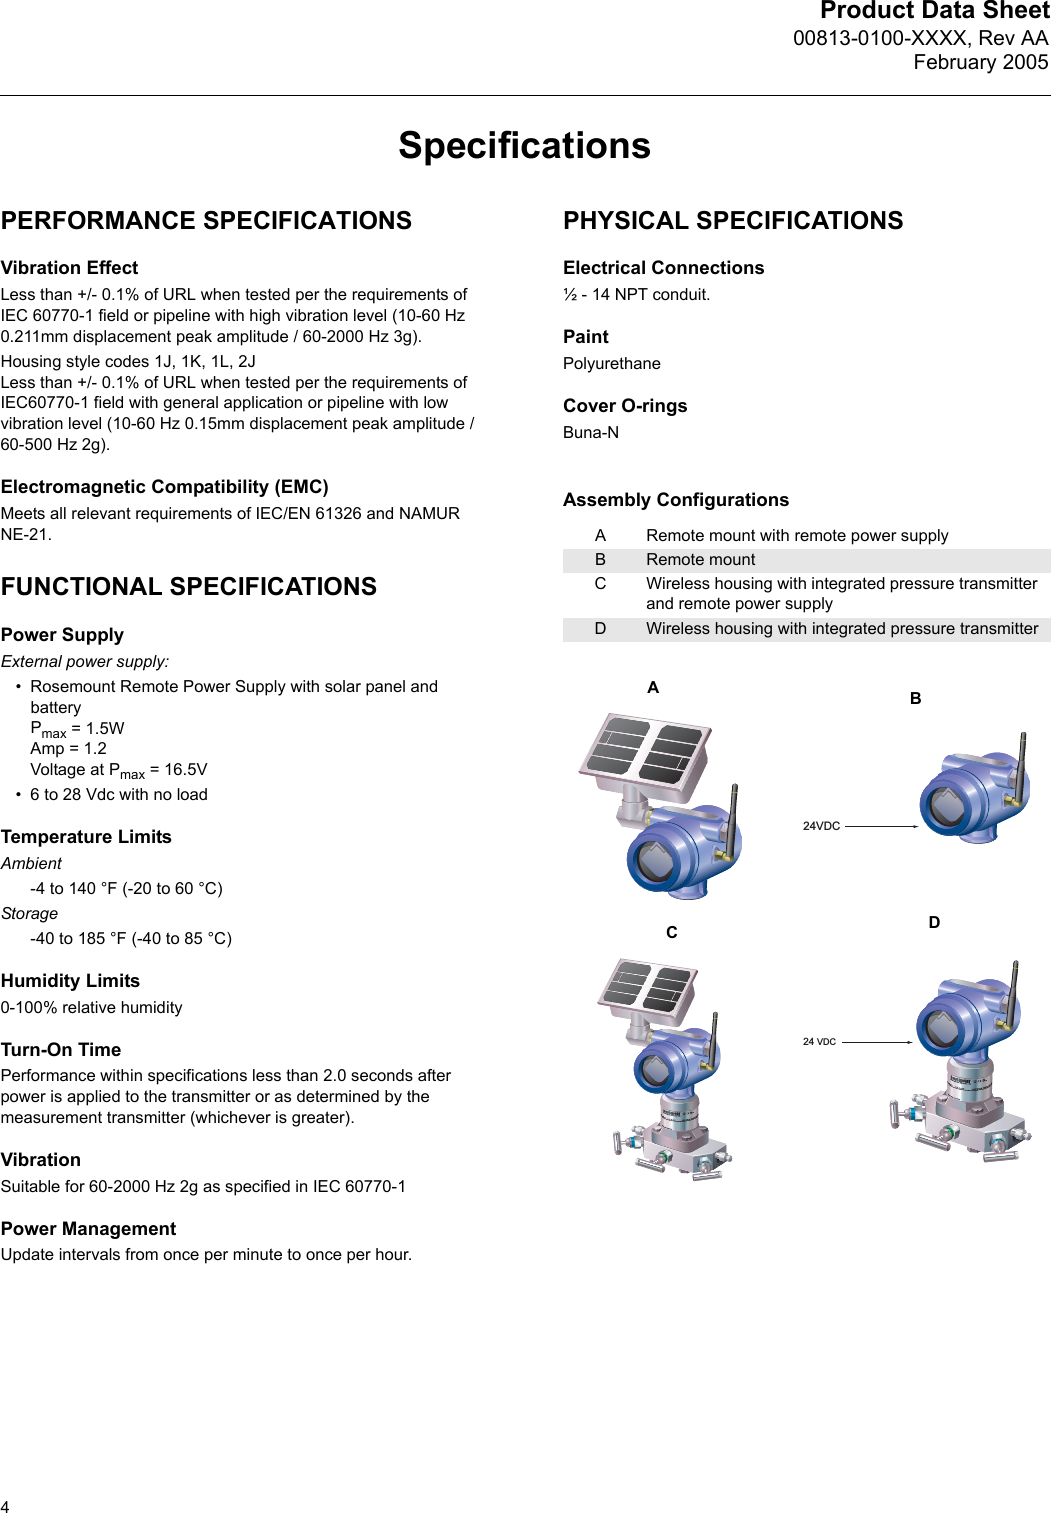 Product Data Sheet00813-0100-XXXX, Rev AAFebruary 20054SpecificationsPERFORMANCE SPECIFICATIONSVibration EffectLess than +/- 0.1% of URL when tested per the requirements of IEC 60770-1 field or pipeline with high vibration level (10-60 Hz 0.211mm displacement peak amplitude / 60-2000 Hz 3g).Housing style codes 1J, 1K, 1L, 2JLess than +/- 0.1% of URL when tested per the requirements of IEC60770-1 field with general application or pipeline with low vibration level (10-60 Hz 0.15mm displacement peak amplitude / 60-500 Hz 2g).Electromagnetic Compatibility (EMC)Meets all relevant requirements of IEC/EN 61326 and NAMUR NE-21.FUNCTIONAL SPECIFICATIONSPower SupplyExternal power supply: • Rosemount Remote Power Supply with solar panel and batteryPmax = 1.5WAmp = 1.2 Voltage at Pmax = 16.5V• 6 to 28 Vdc with no loadTemperature LimitsAmbient-4 to 140 °F (-20 to 60 °C)Storage-40 to 185 °F (-40 to 85 °C)Humidity Limits0-100% relative humidityTurn-On TimePerformance within specifications less than 2.0 seconds after power is applied to the transmitter or as determined by the measurement transmitter (whichever is greater).VibrationSuitable for 60-2000 Hz 2g as specified in IEC 60770-1Power ManagementUpdate intervals from once per minute to once per hour.PHYSICAL SPECIFICATIONSElectrical Connections½ - 14 NPT conduit.PaintPolyurethaneCover O-ringsBuna-NAssembly ConfigurationsARemote mount with remote power supplyBRemote mountCWireless housing with integrated pressure transmitter and remote power supplyDWireless housing with integrated pressure transmitter24VDC24 VDCABCD